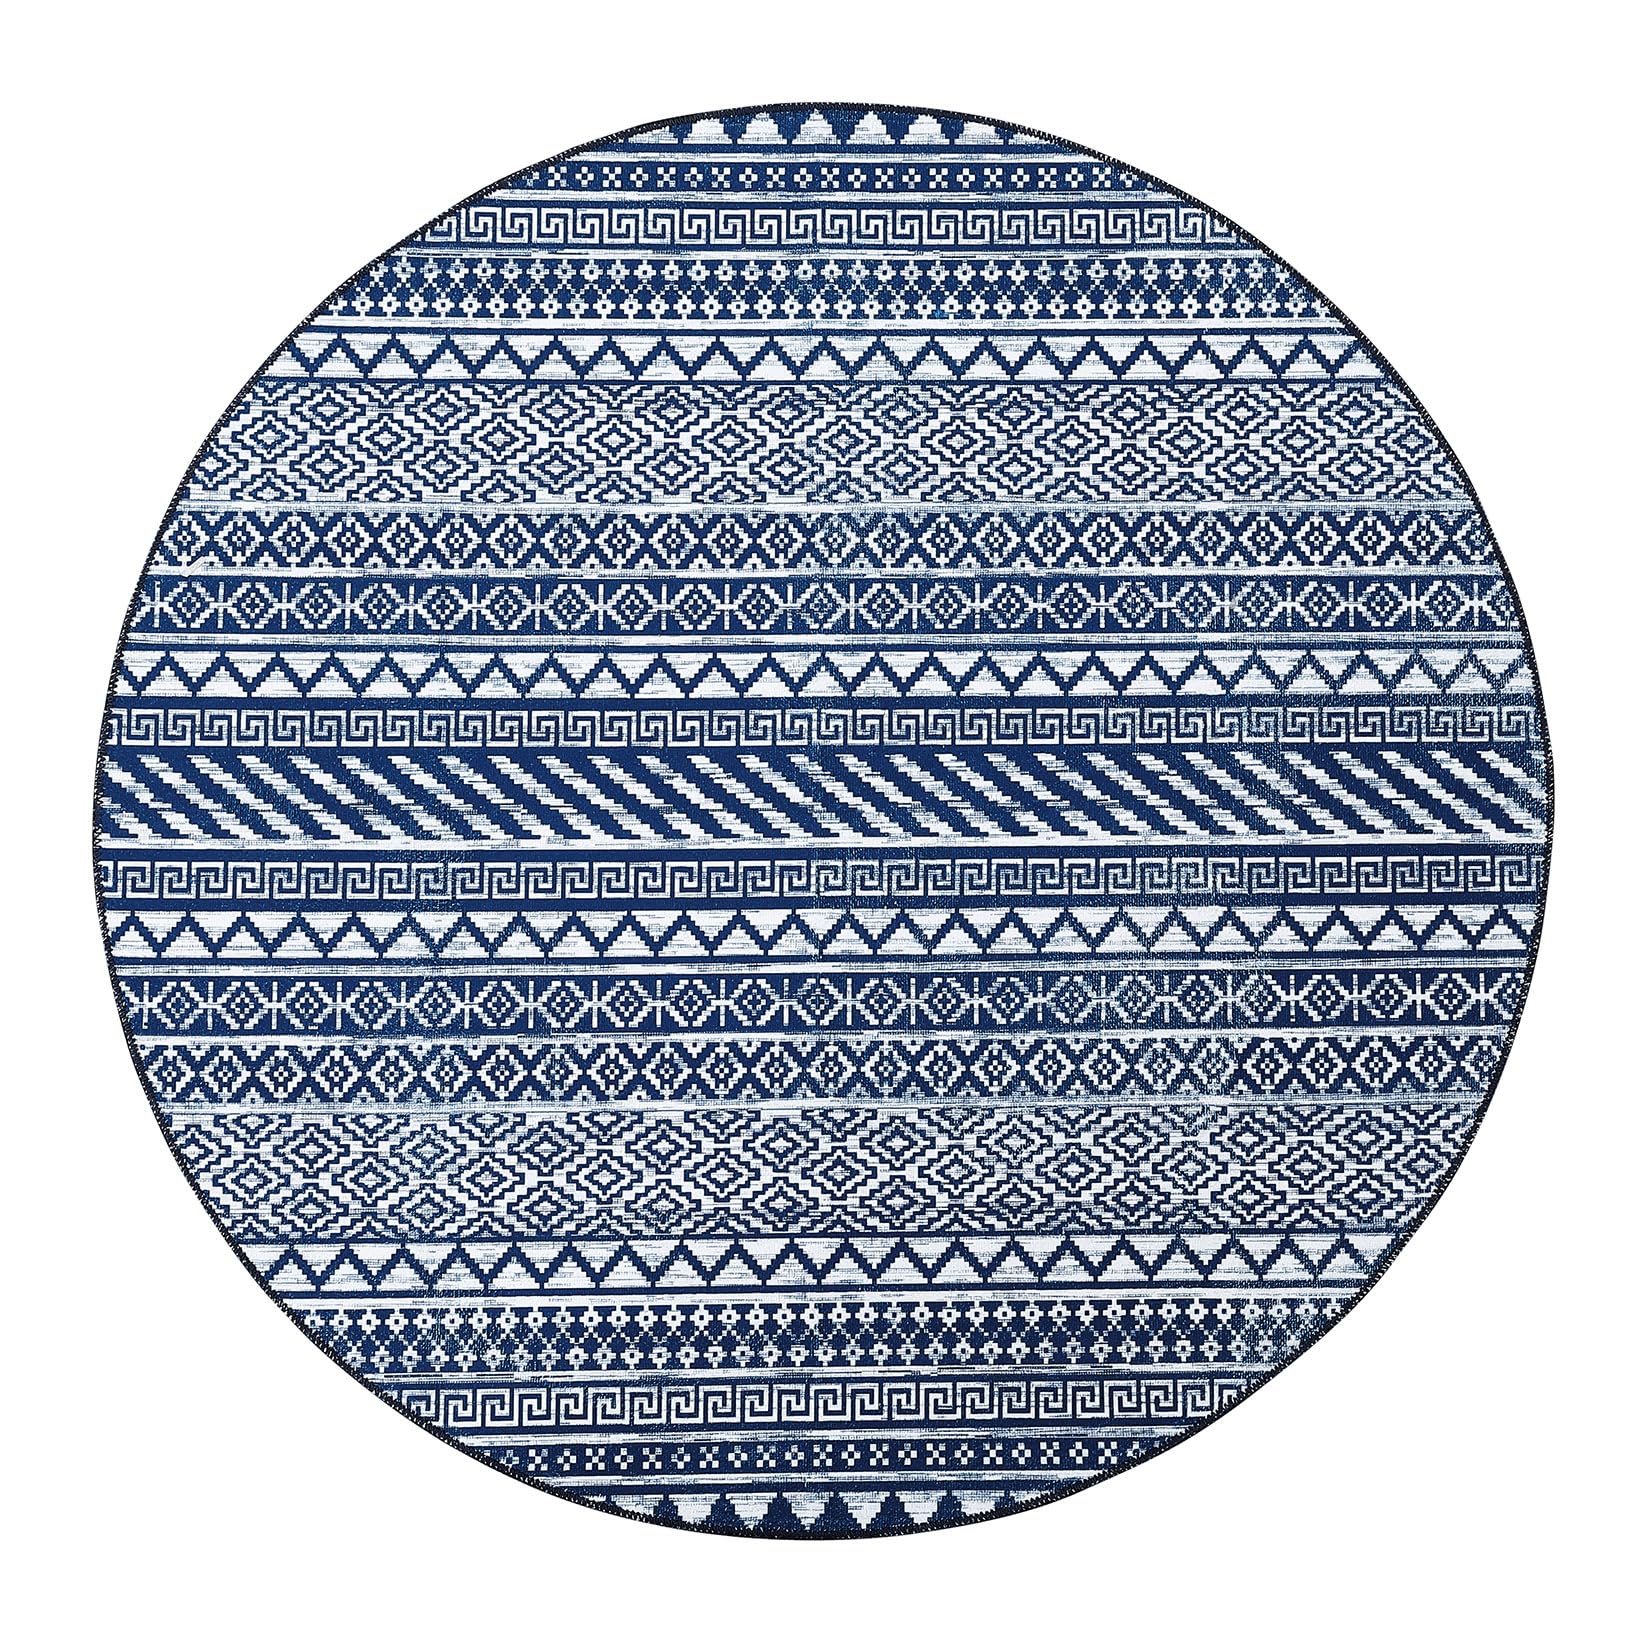 Boho Machine Washable Area Rug Blue Small Rug Geometric Farmhouse Rug Mat Stain Resistant Non-Slip Area Rug Mat for Living Room Bedroom, 3' x 5'